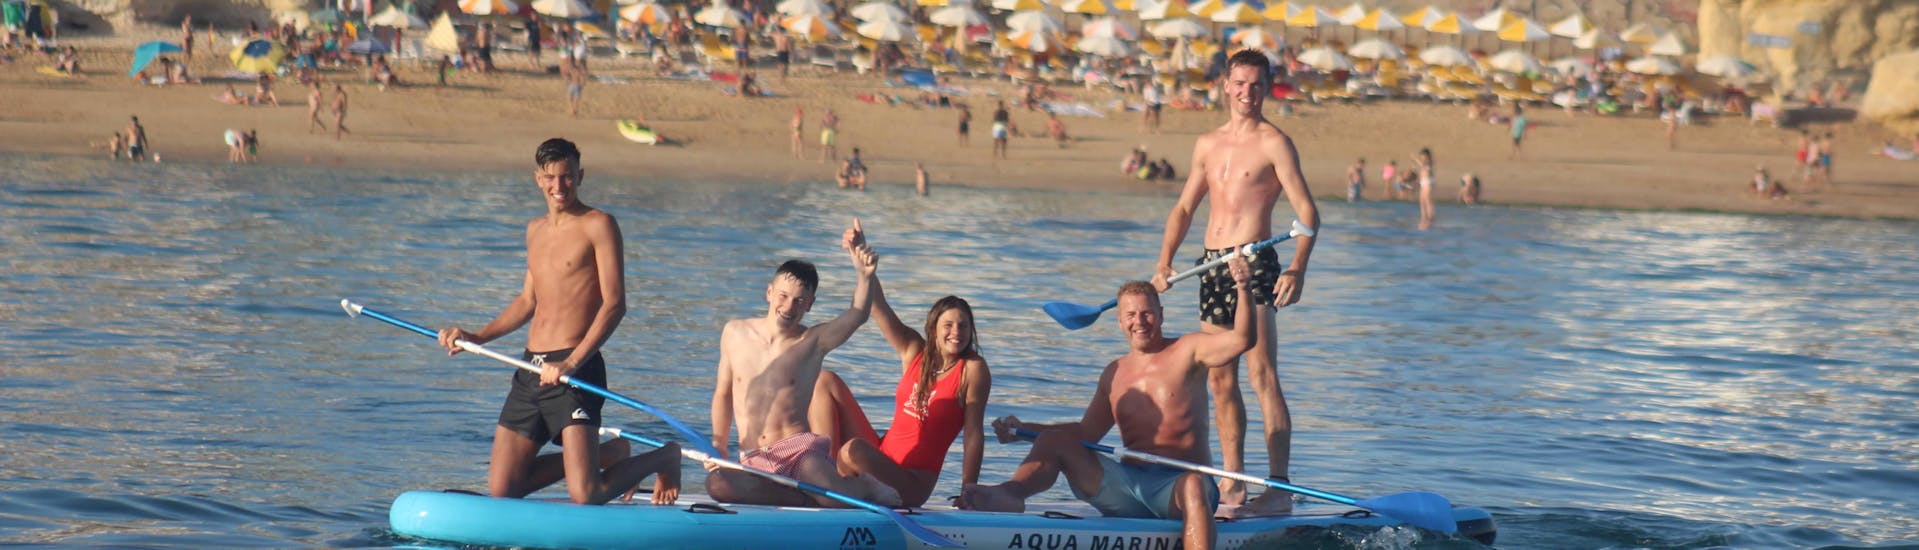 mega-stand-up-paddleboard-rental-in-armacao-de-pera-moments-watersports-algarve